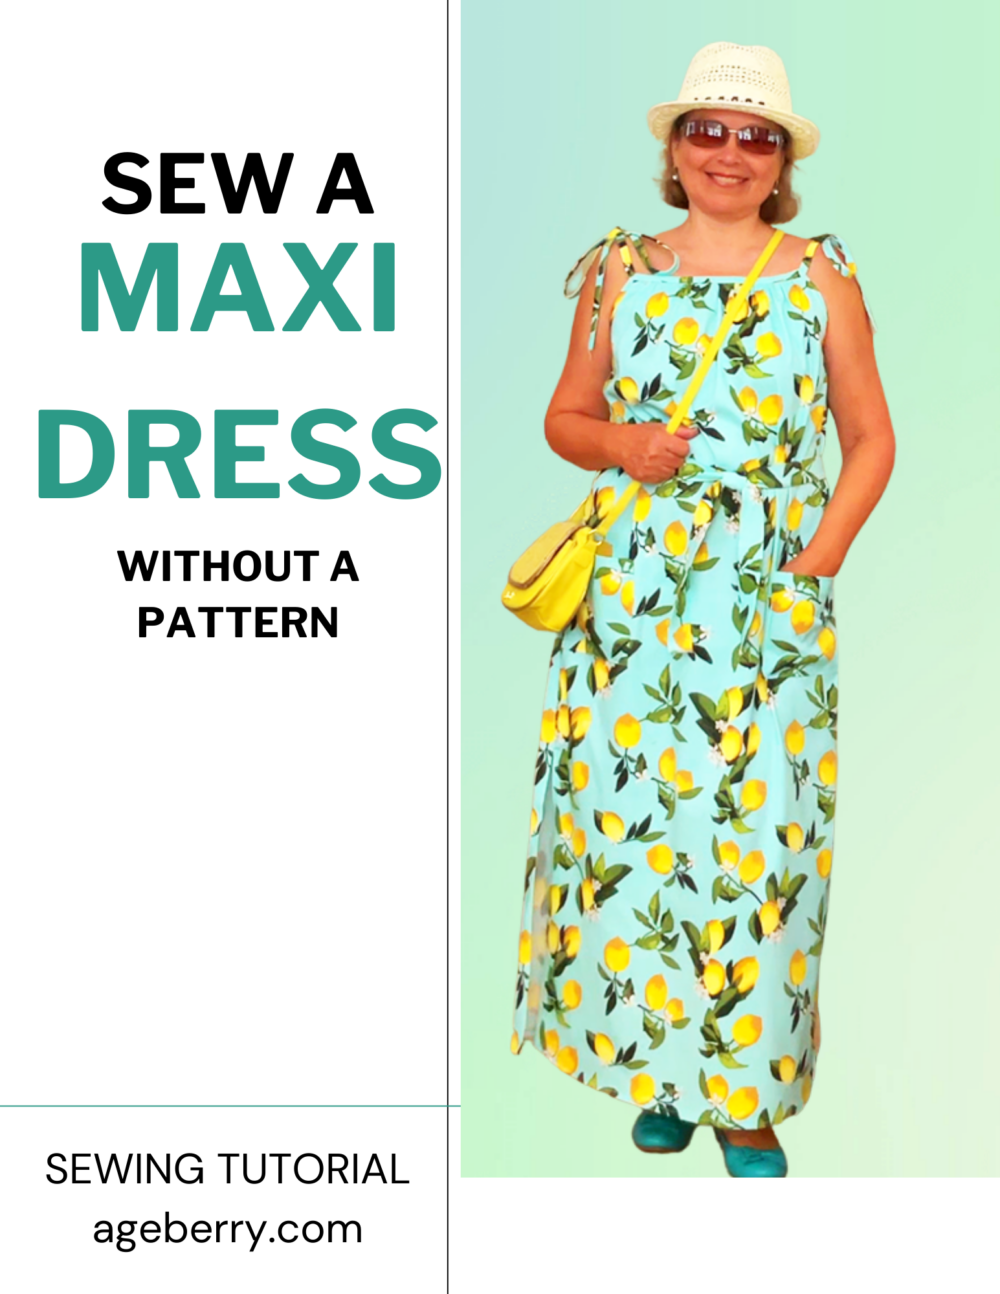 How to Sew a Maxi Dress without a pattern, women's clothing tutorial